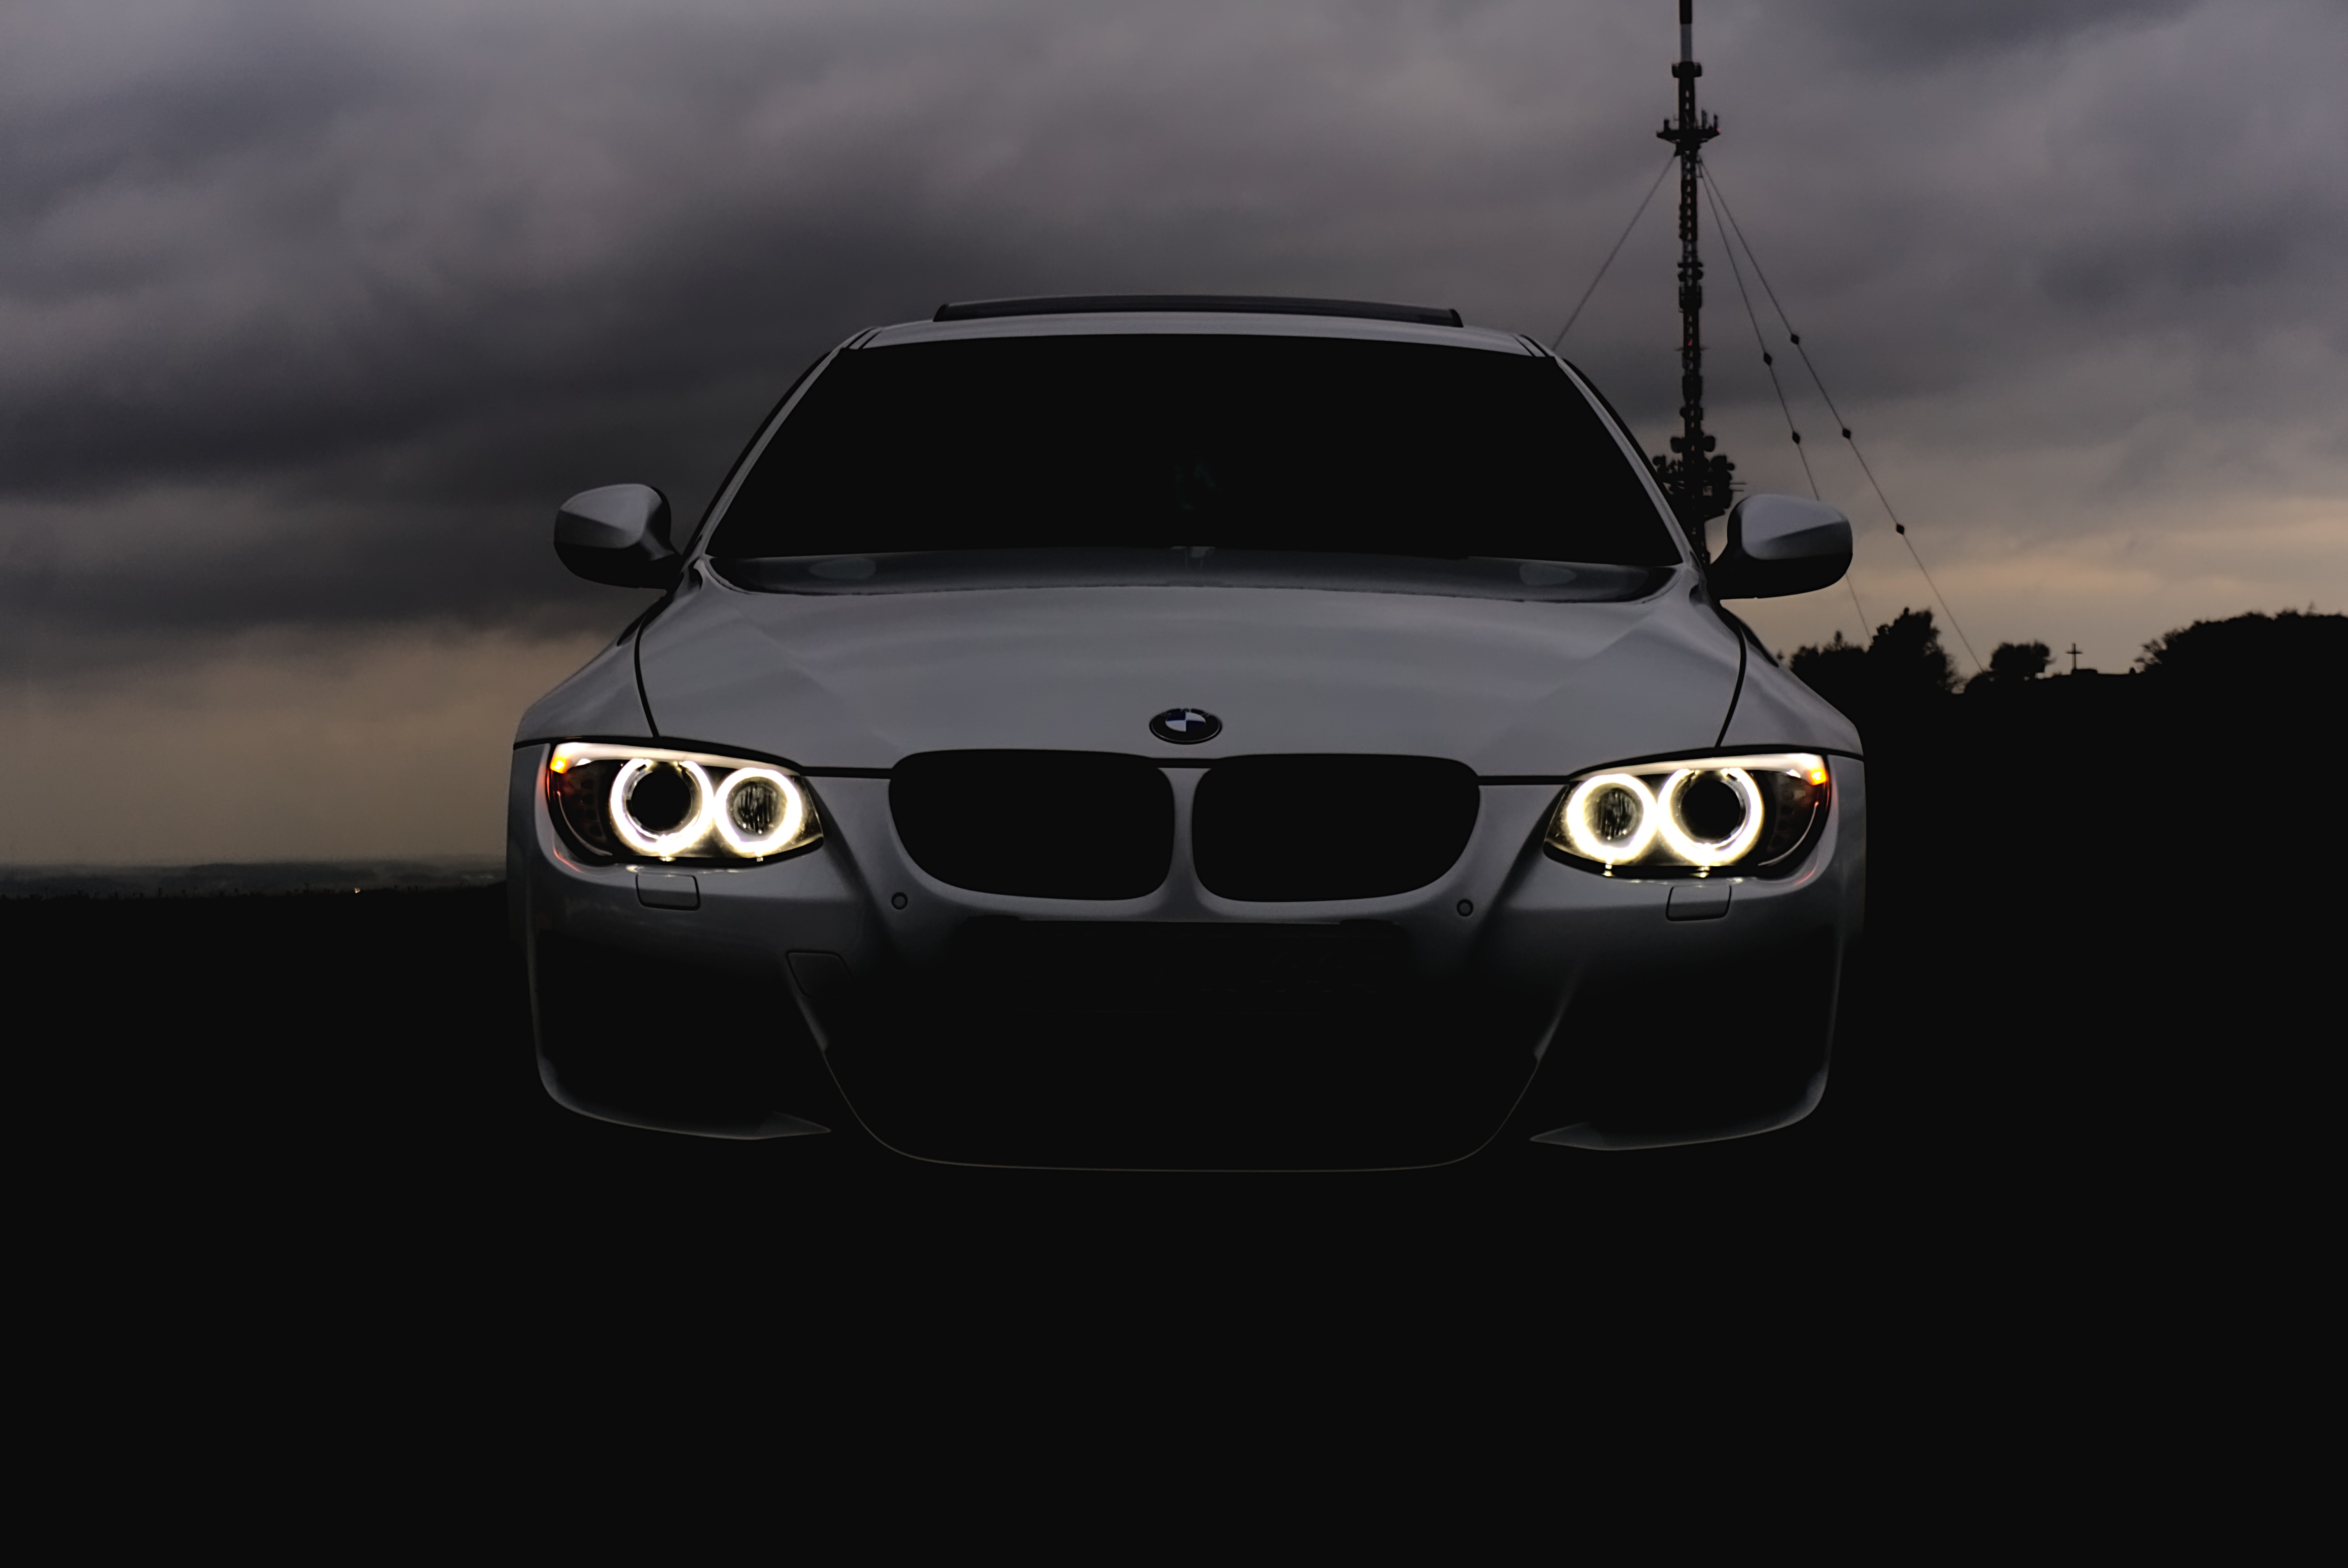 Horizontal Wallpaper car, bmw, cars, clouds, lights, mainly cloudy, overcast, headlights